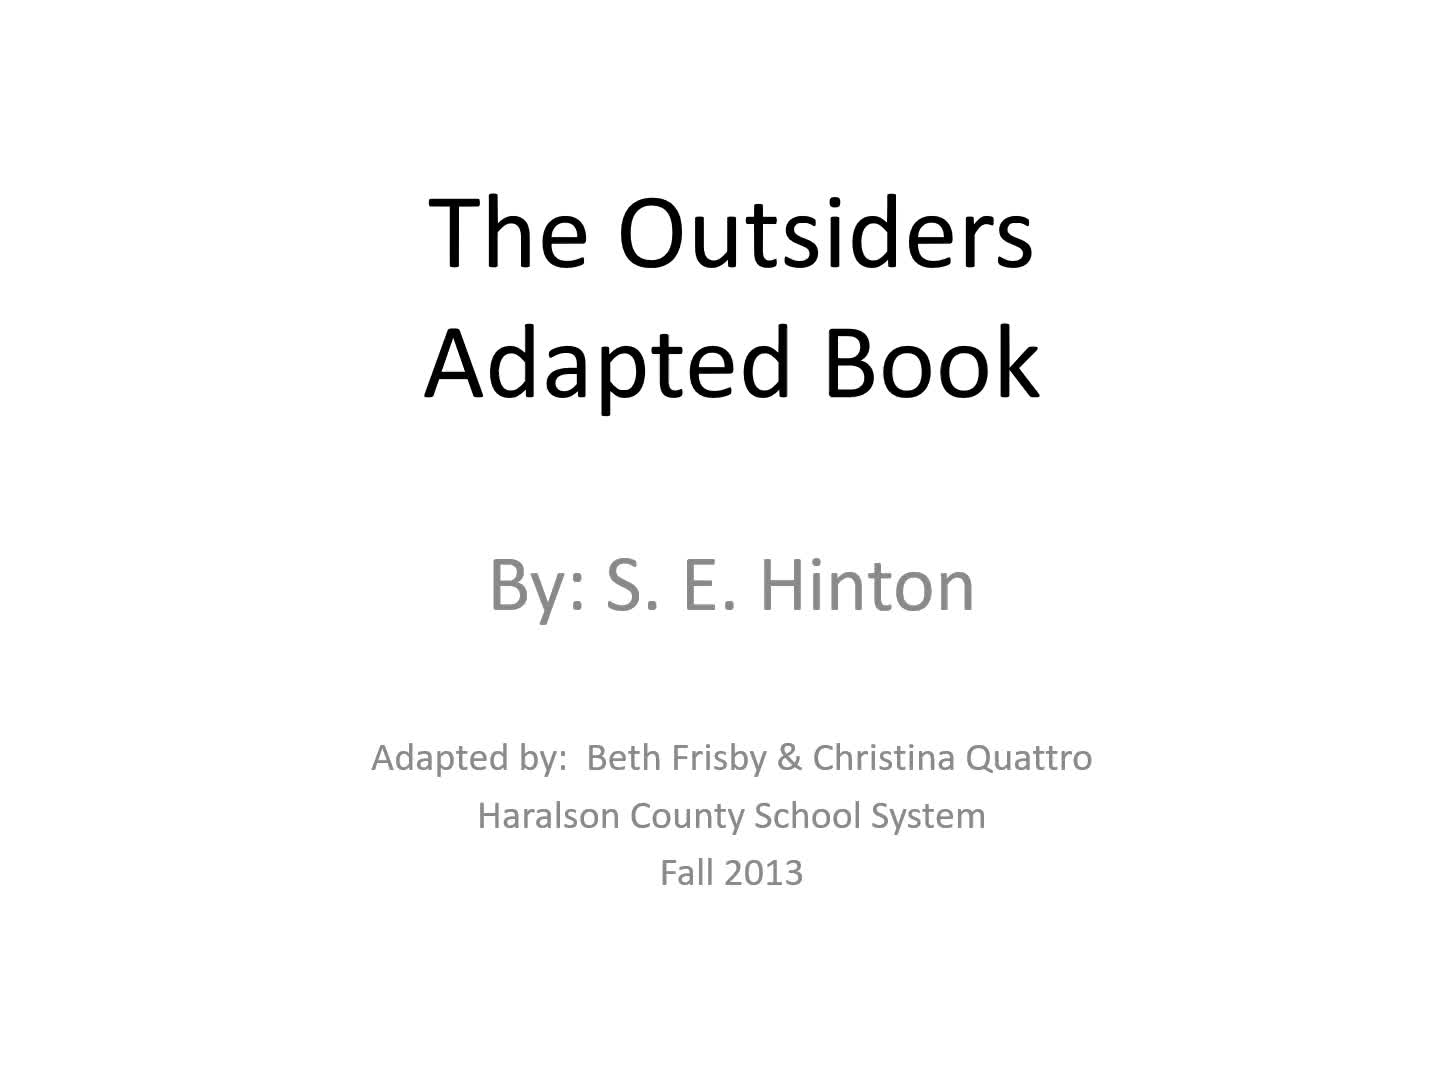 The Outsiders Adapted Version